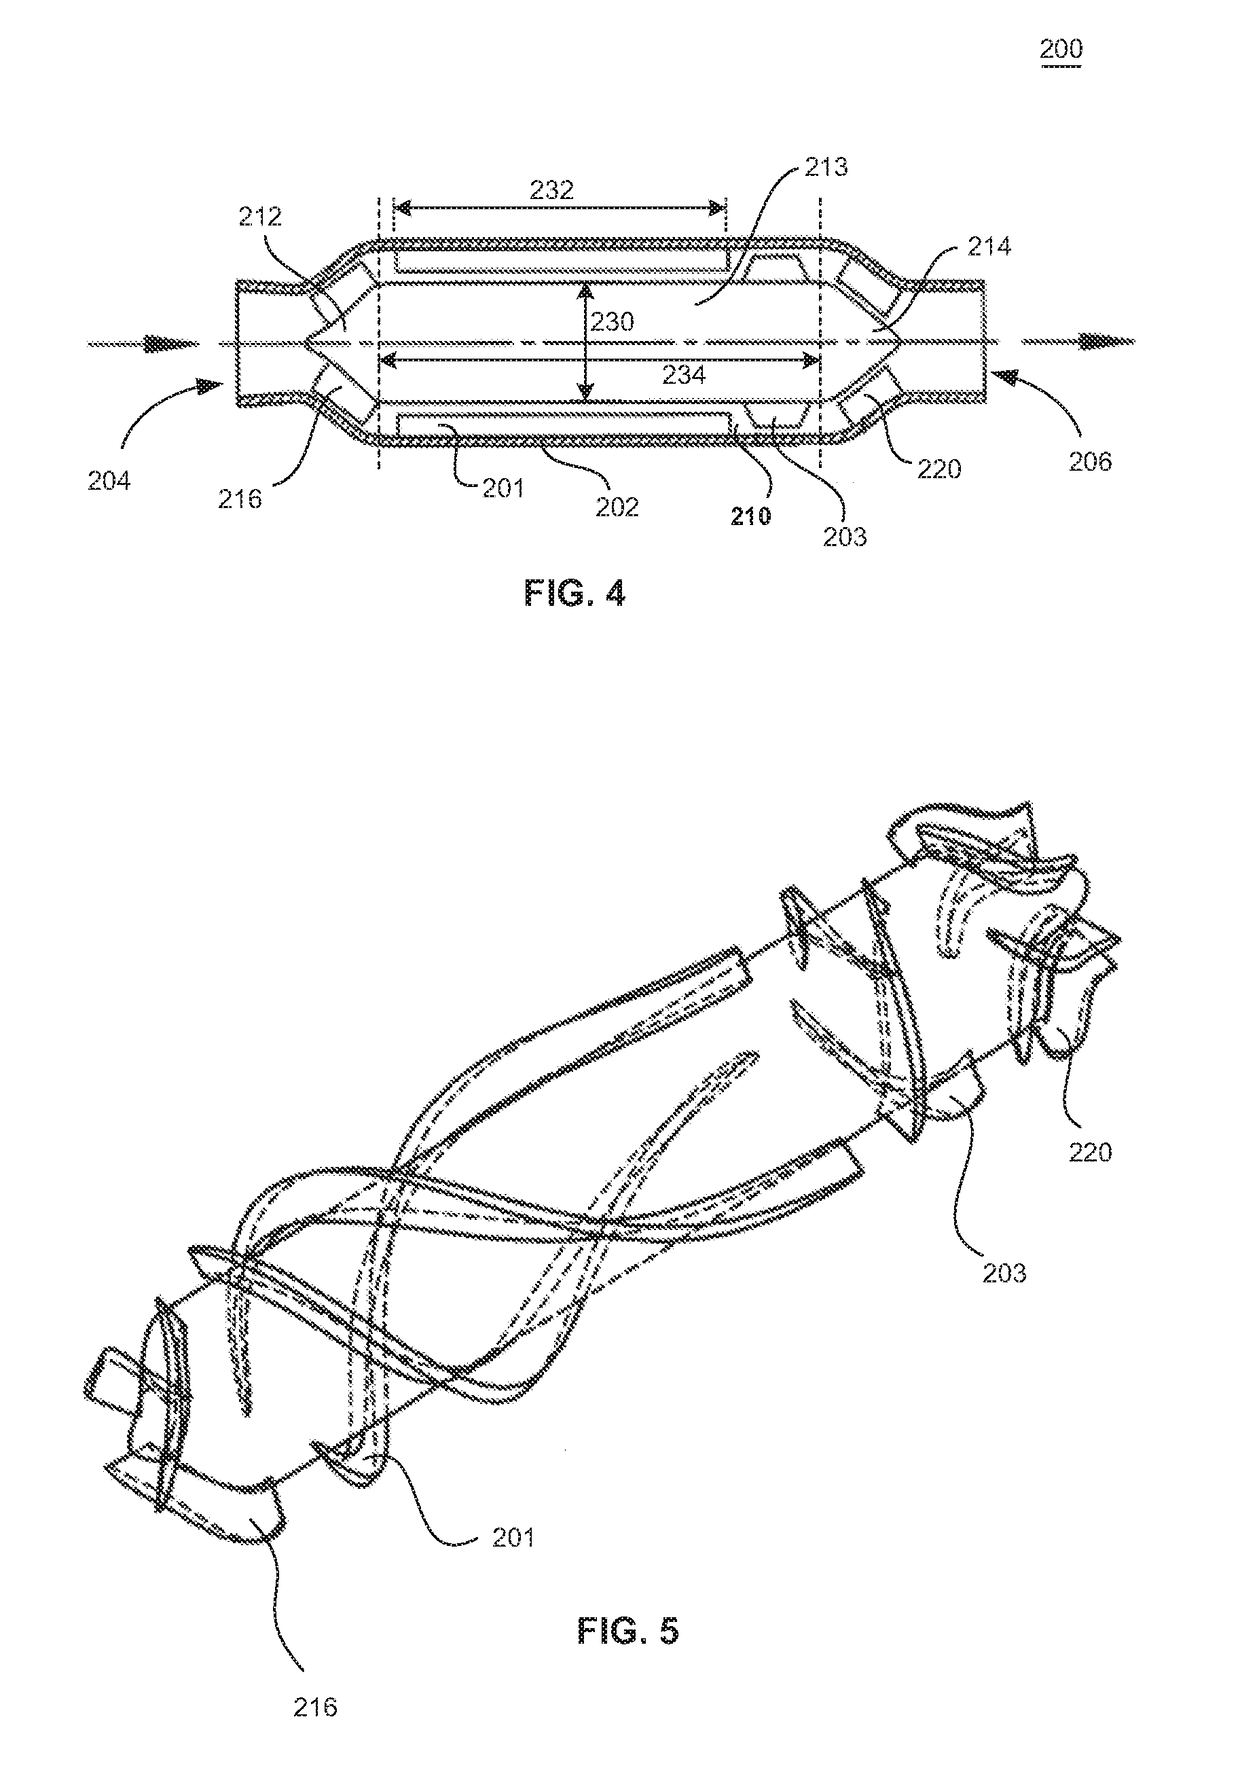 Blood pump with separate mixed-flow and axial-flow impeller stages and multi-stage stators